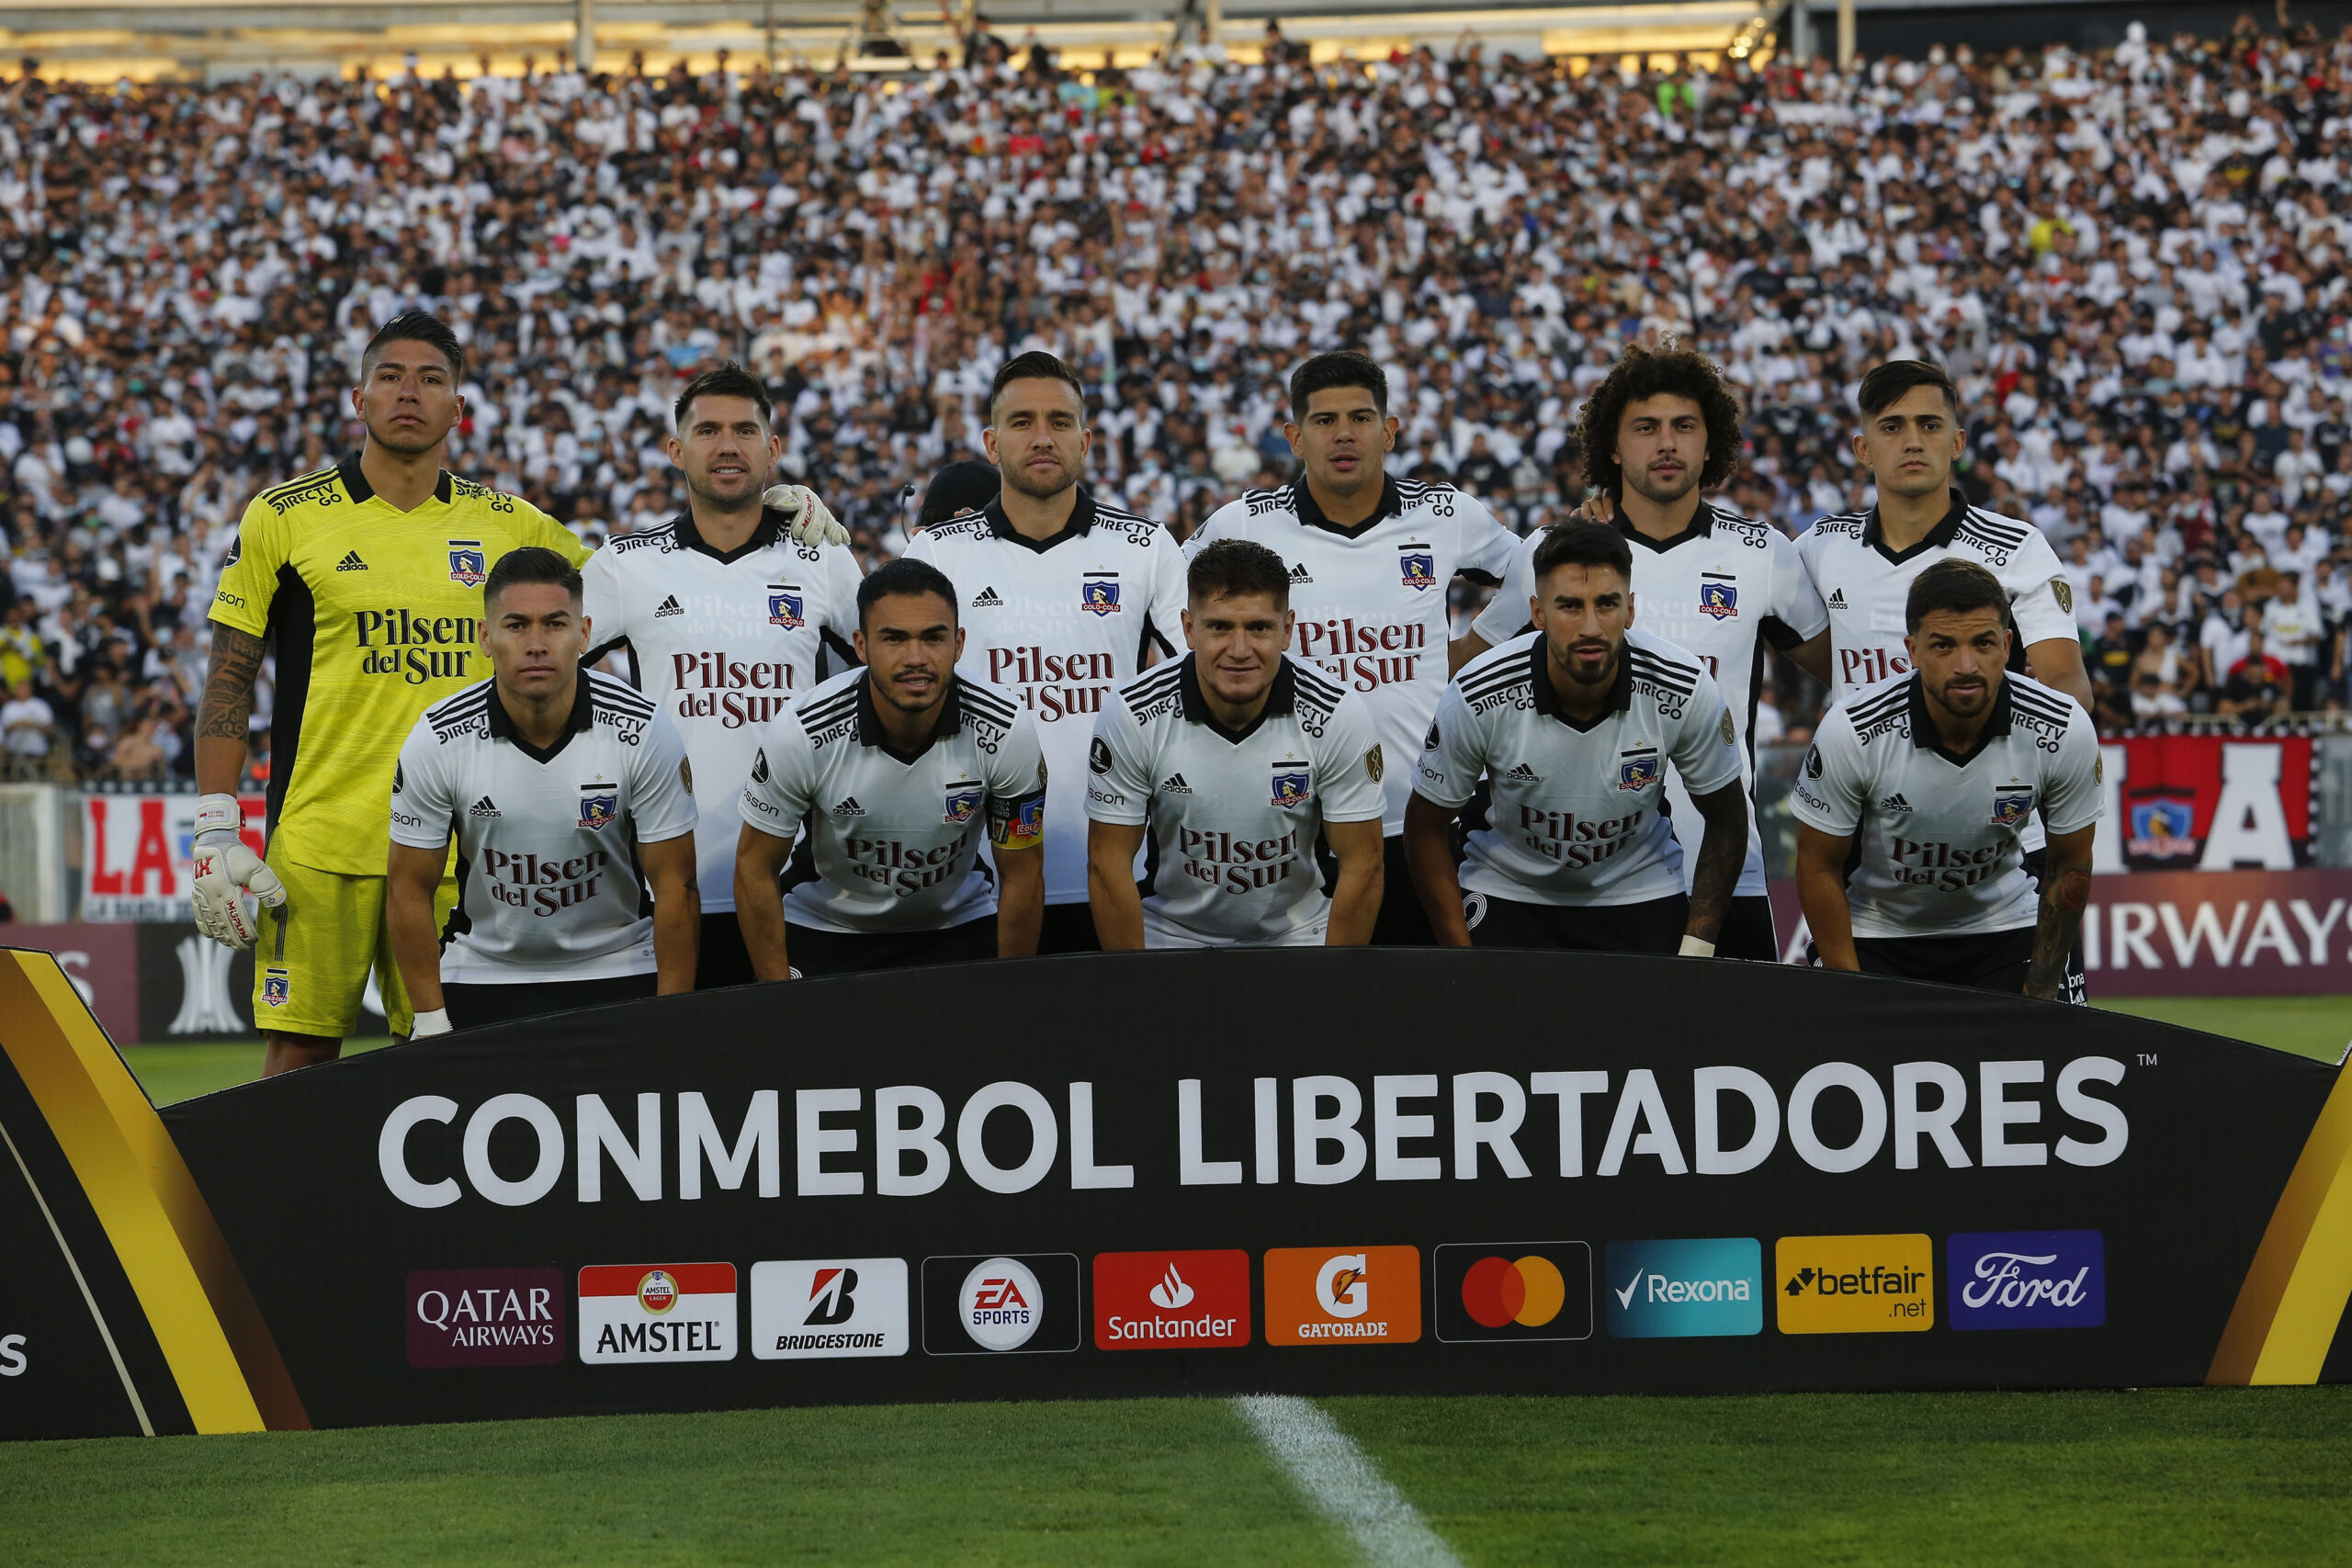 SANTIAGO, CHILE - APRIL 13: Players of Colo Colo pose for a team photo prior to a match Colo Colo and Alianza Lima as part of Copa CONMEBOL Libertadores 2022 at Monumental David Arellano Stadium on April 13, 2022 in Santiago, Chile. (Photo by Marcelo Hernandez/Getty Images)